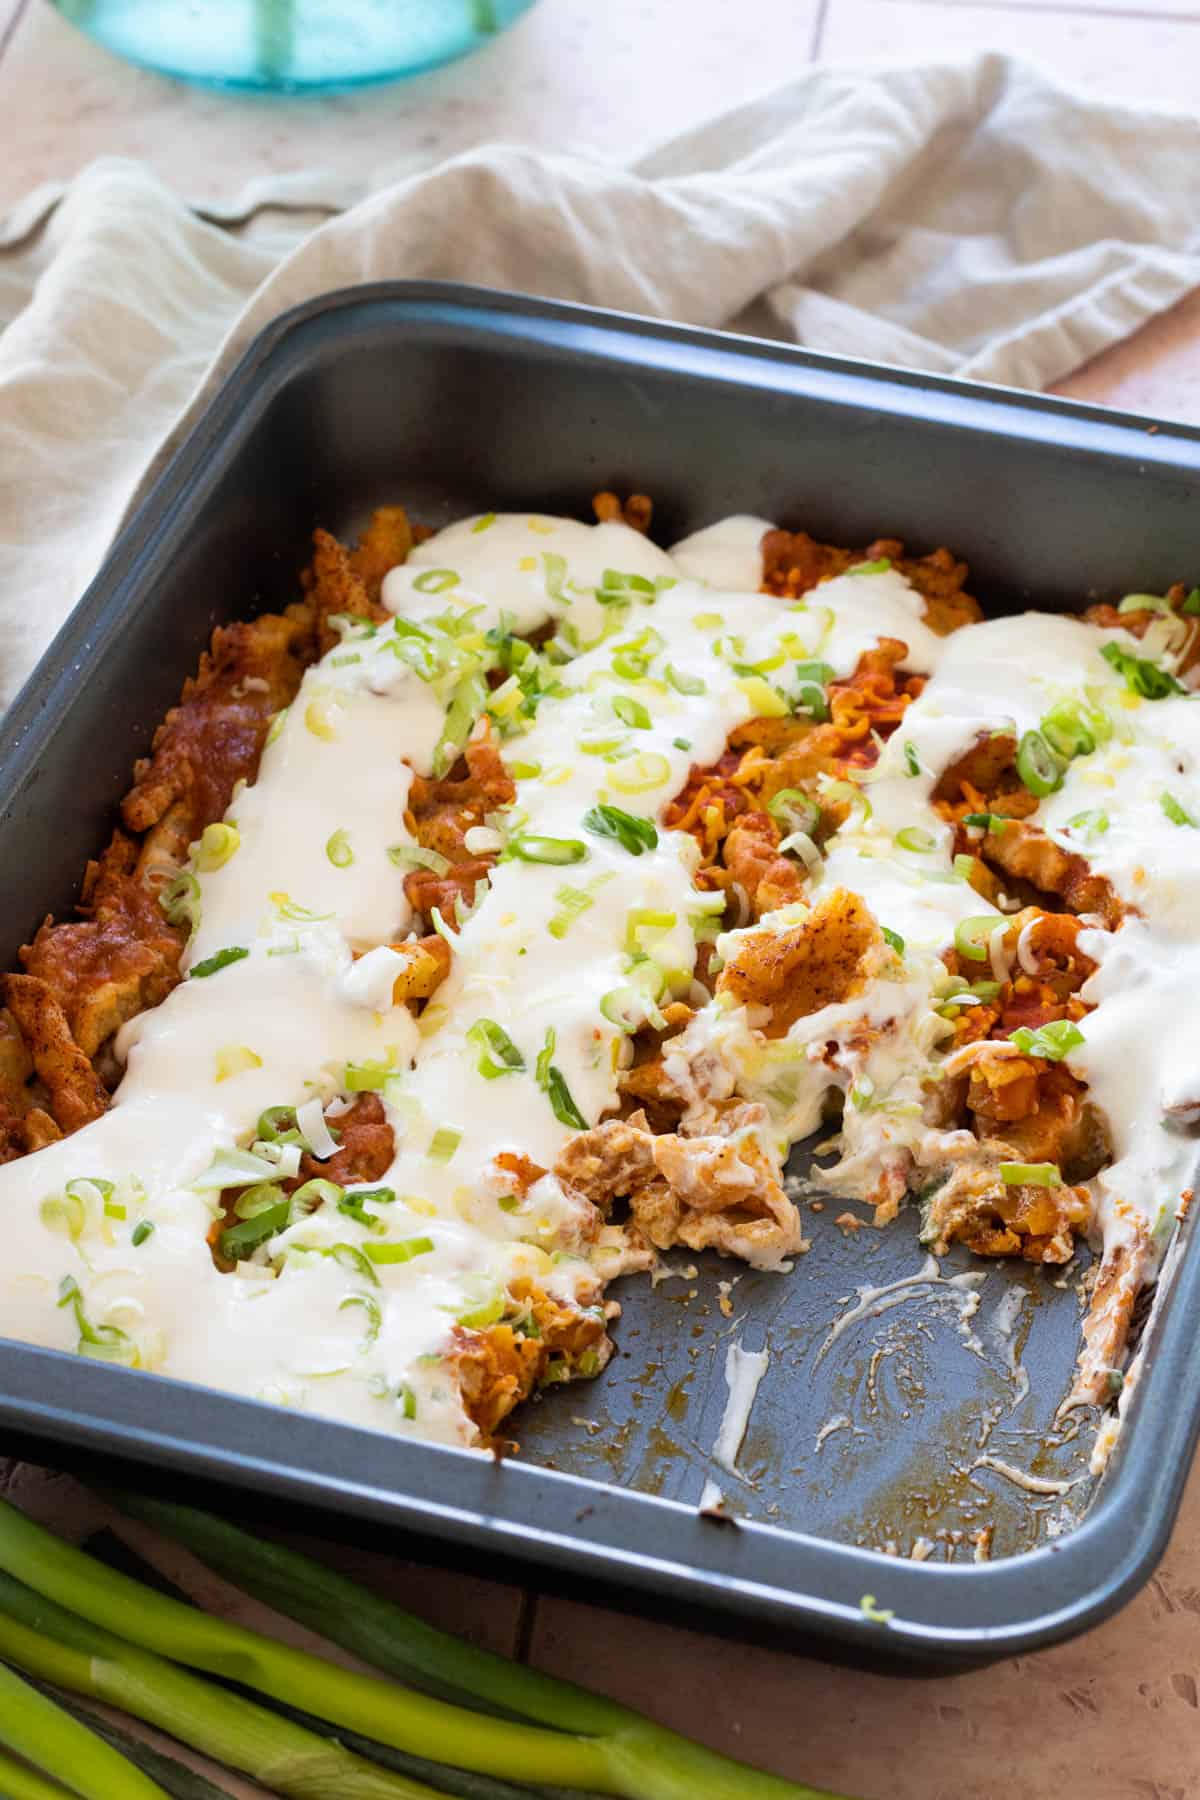 Leftover french fries casserole topped with sour cream.